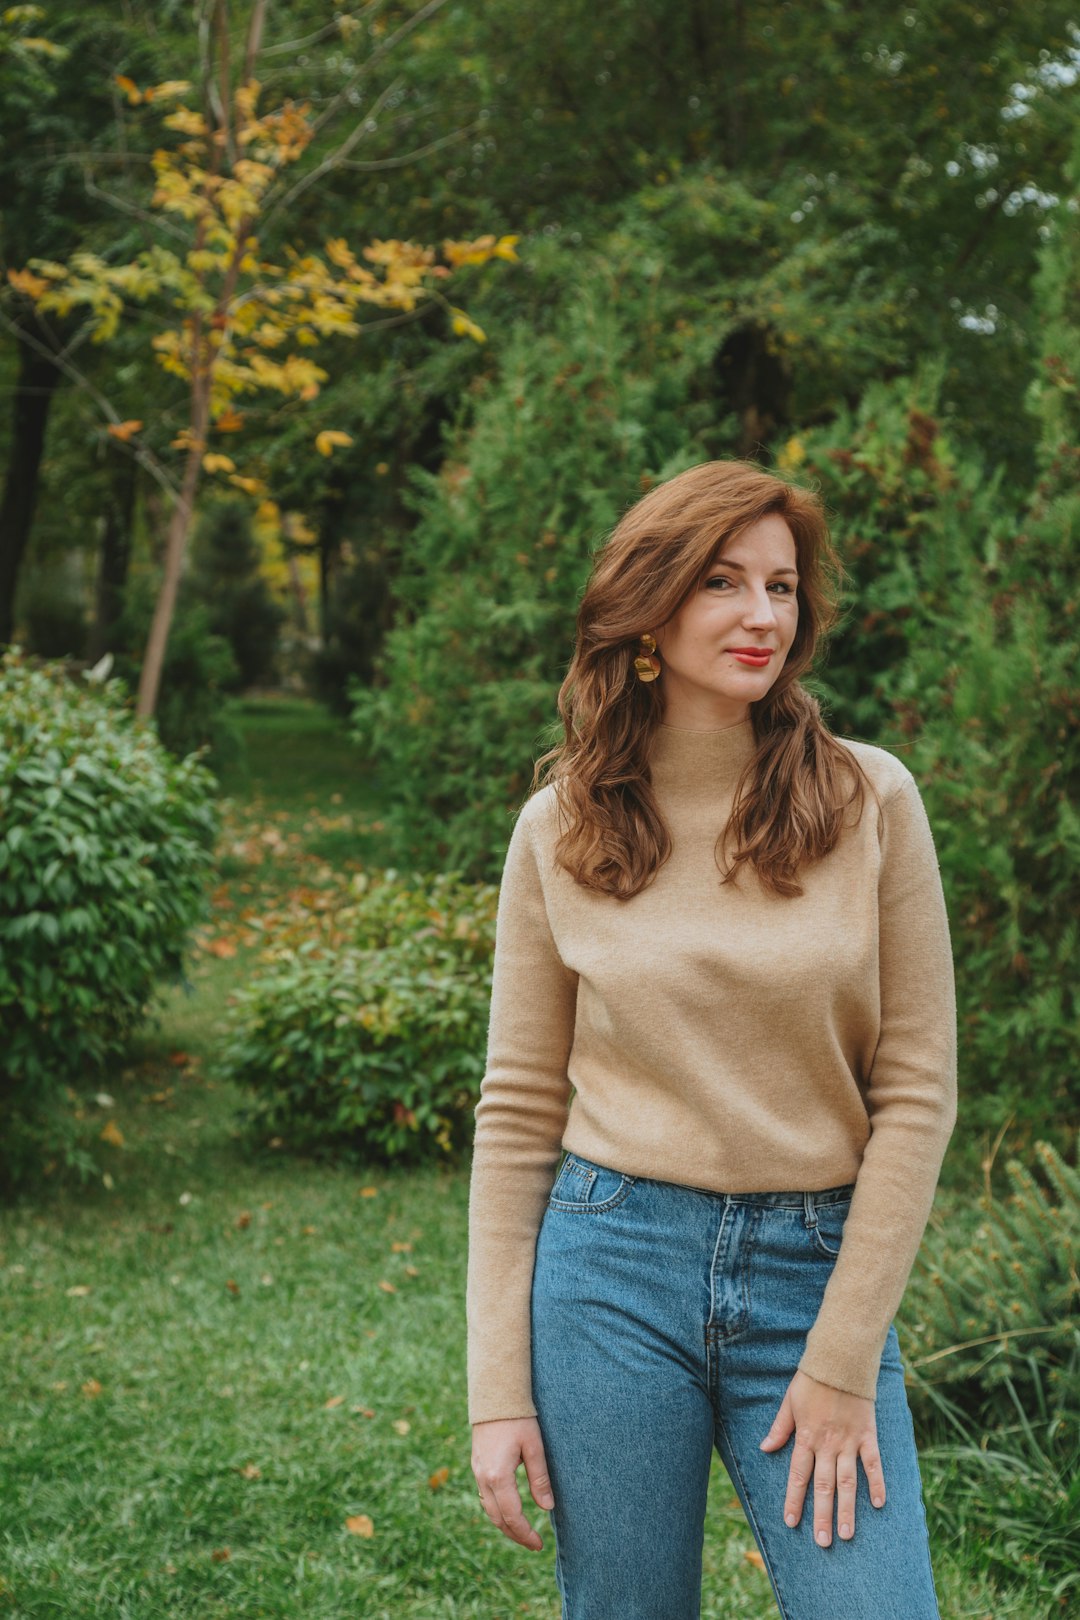 woman in beige long sleeve shirt and blue denim jeans standing near green plants during daytime